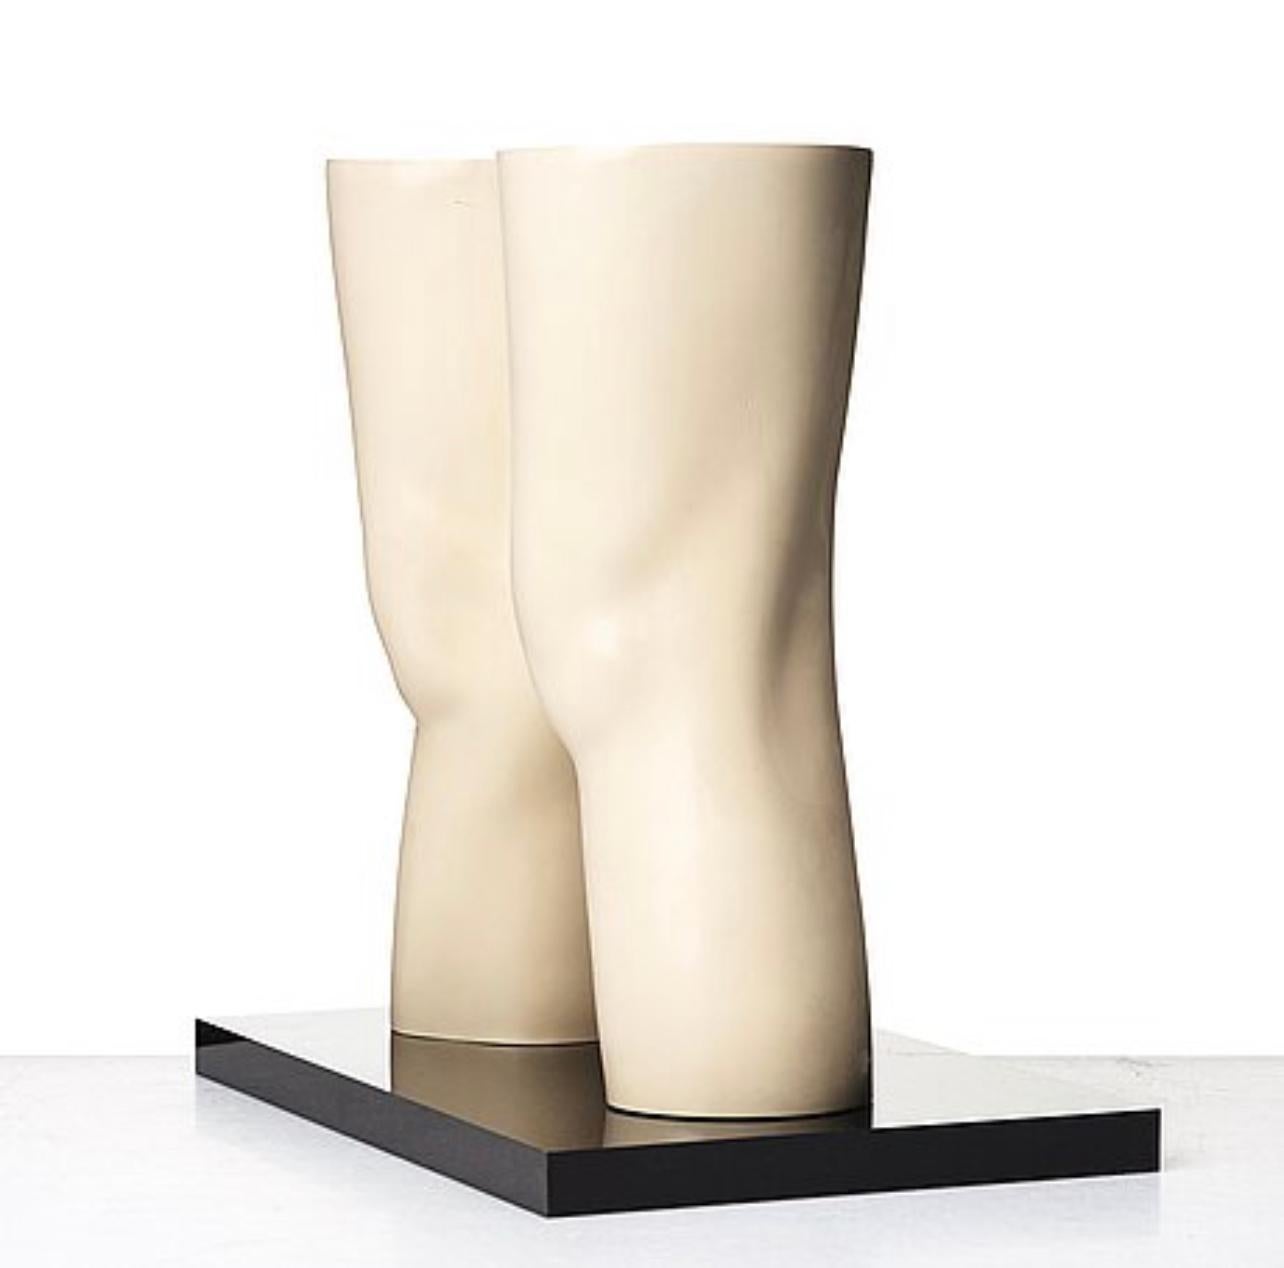 Artist: Claus Oldenburg (1929)
Title: London Knees (A. & P. 51; A. 677)
Year: 1966
Medium: Pair of cast flexible latex sculptures coated in polyurethane with single acrylic plastic base, with accompanying set of three green cloth-covered paper board